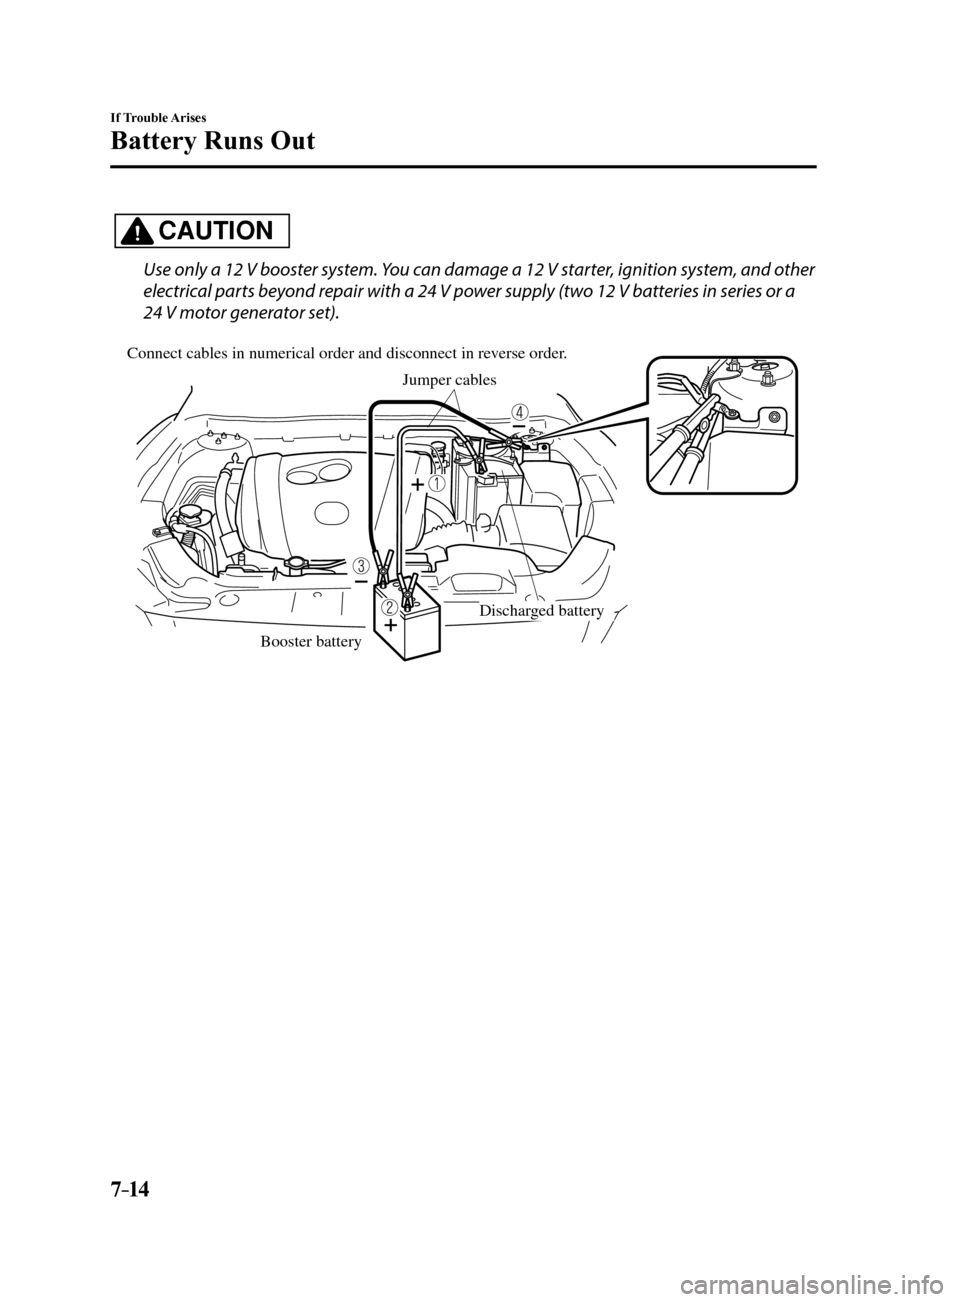 MAZDA MODEL 6 2017  Owners Manual (in English) 7–14
If Trouble Arises
Battery Runs Out
CAUTION
Use only a 12 V booster system. You can damage a 12 V starter, ignition system, and other 
electrical parts beyond repair with a 24 V power supply (tw